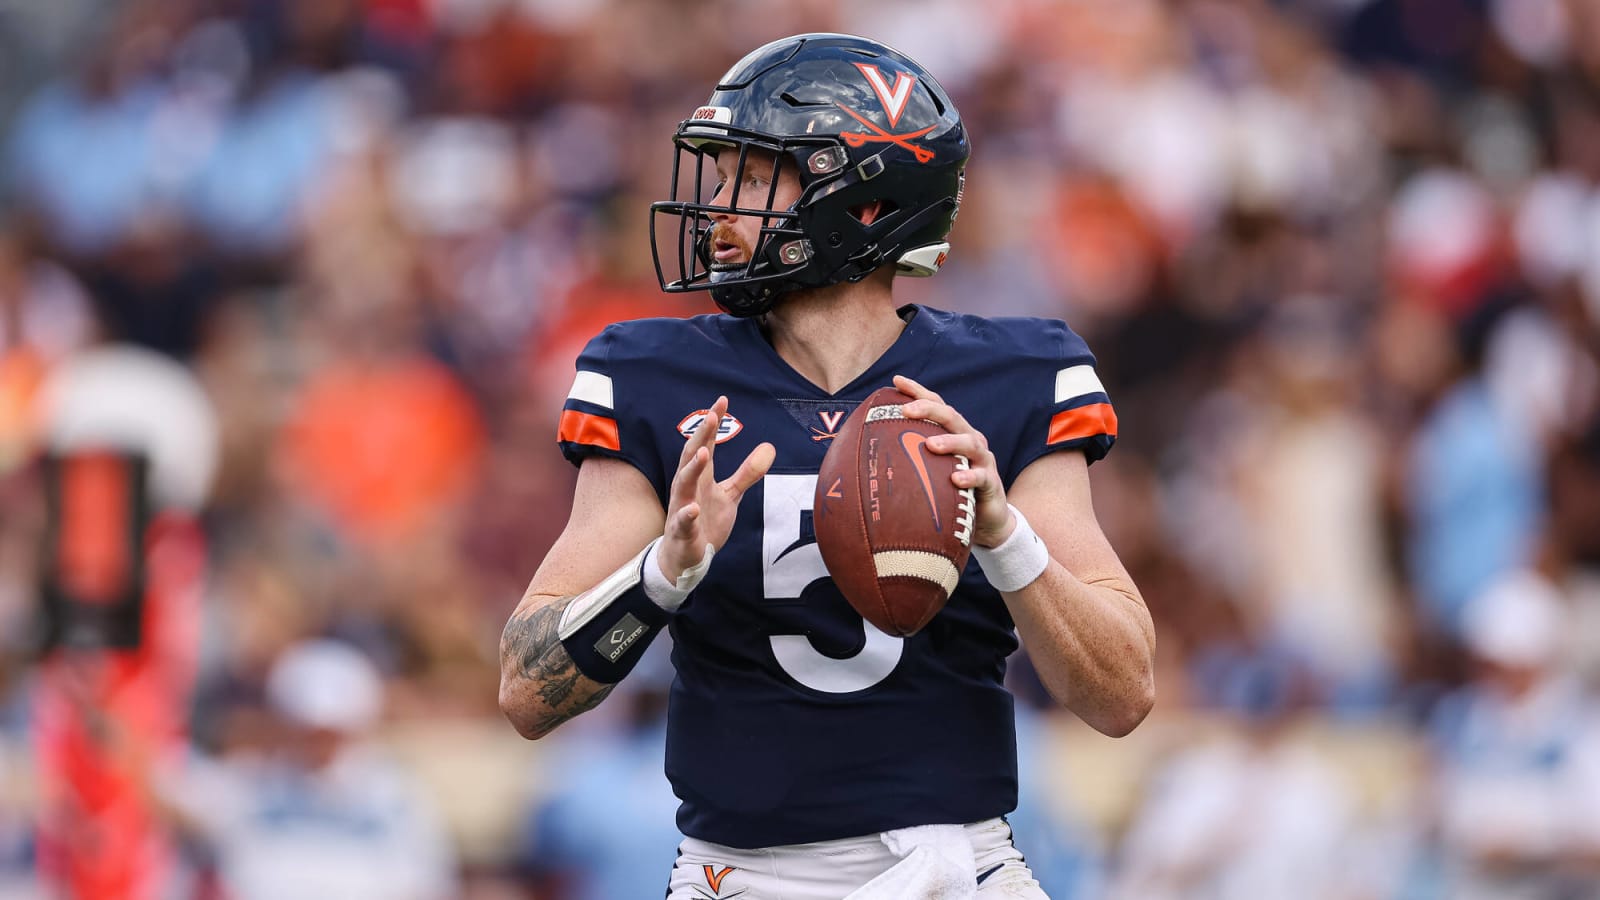 Virginia QB Brennan Armstrong has worst possible start to game